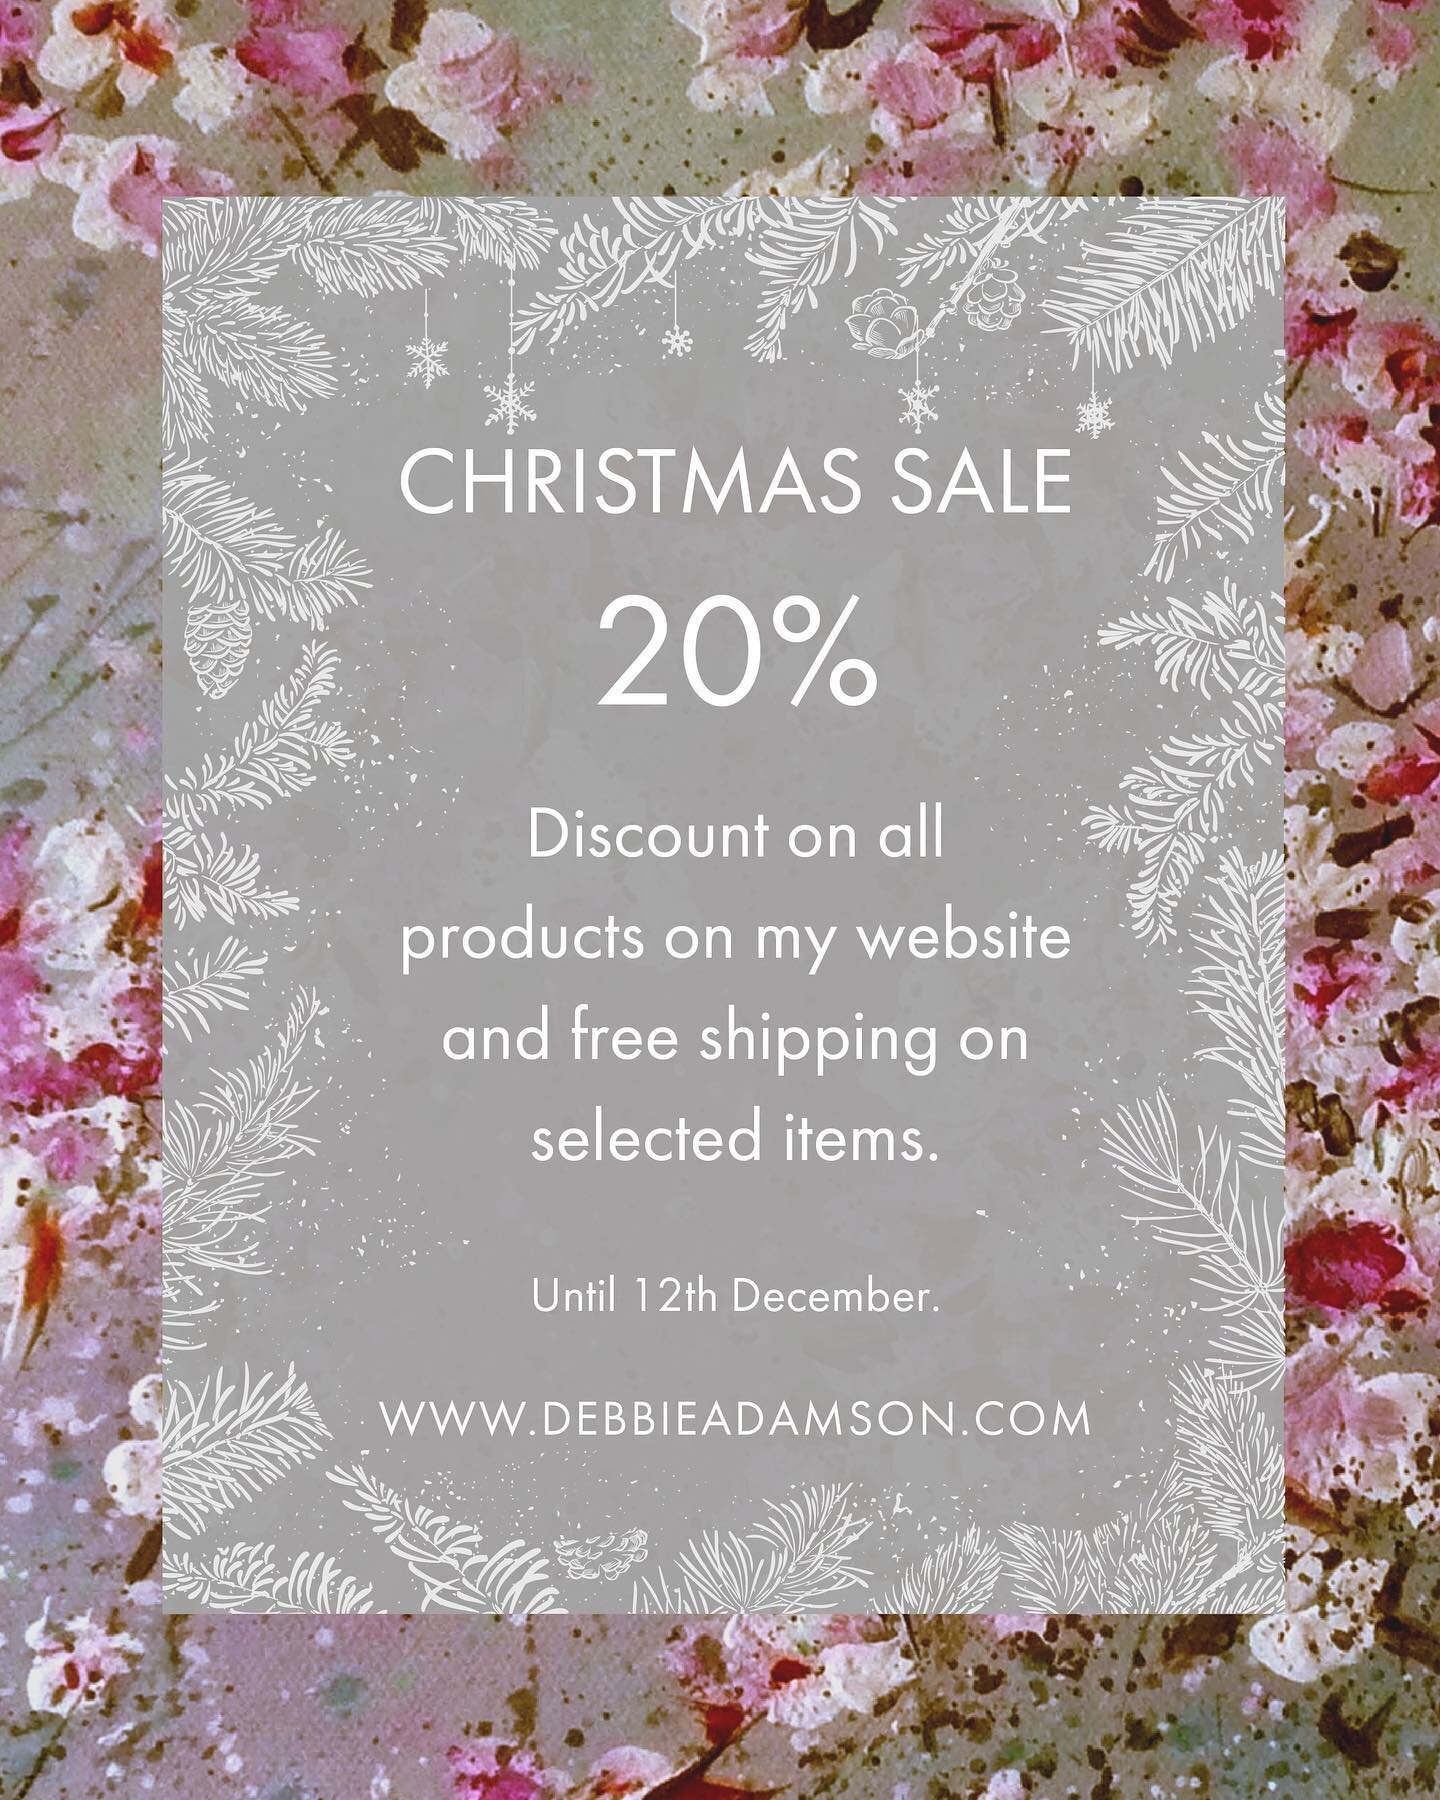 As an early Christmas gift to my loyal followers and customers, my Christmas Sale is now on!!! ❄️
20% off ALL products on my website, and FREE shipping on selected items! The offer is only valid until 12th of December&hellip; so get buying those Xmas